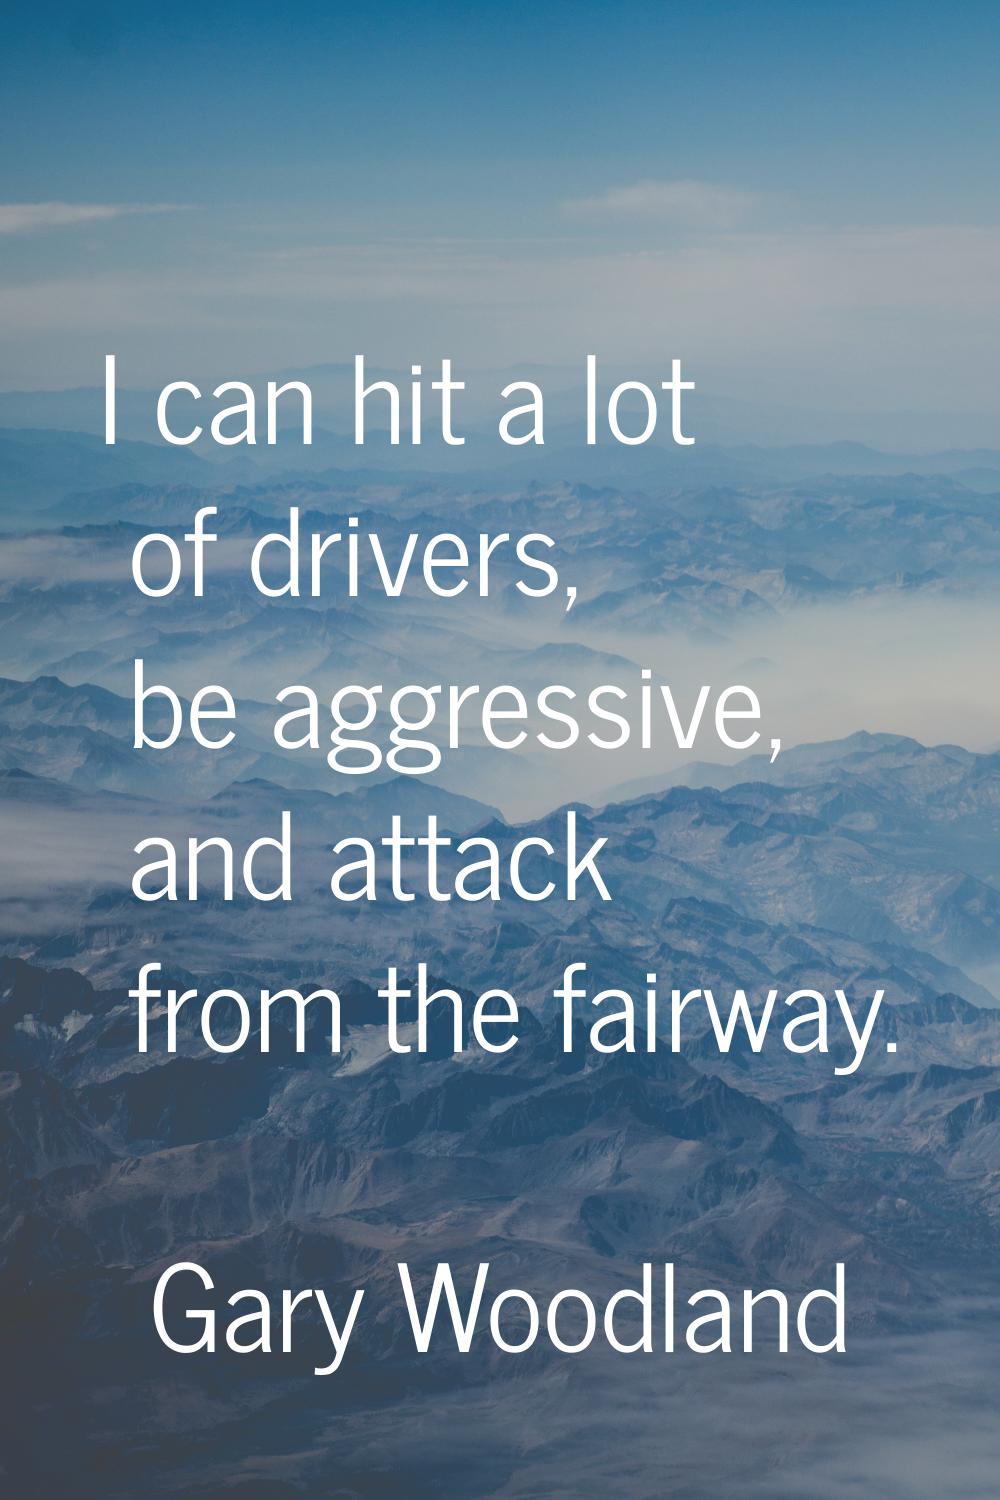 I can hit a lot of drivers, be aggressive, and attack from the fairway.